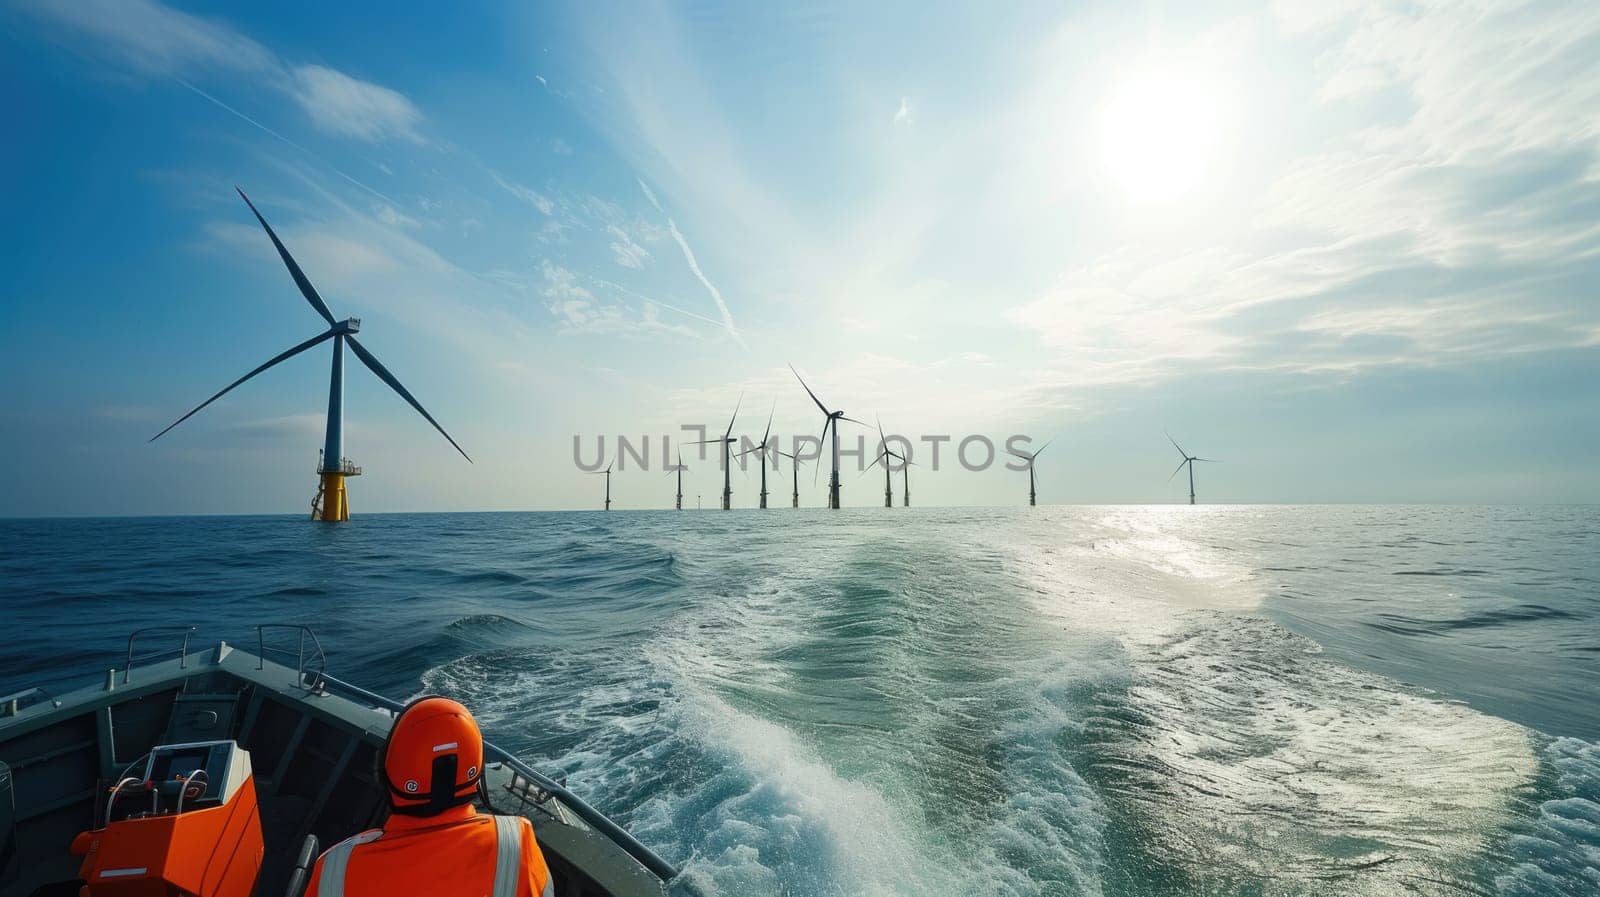 A man observes wind turbines on a boat amidst the vast ocean, with the sky, clouds, and water blending harmoniously. AIG41